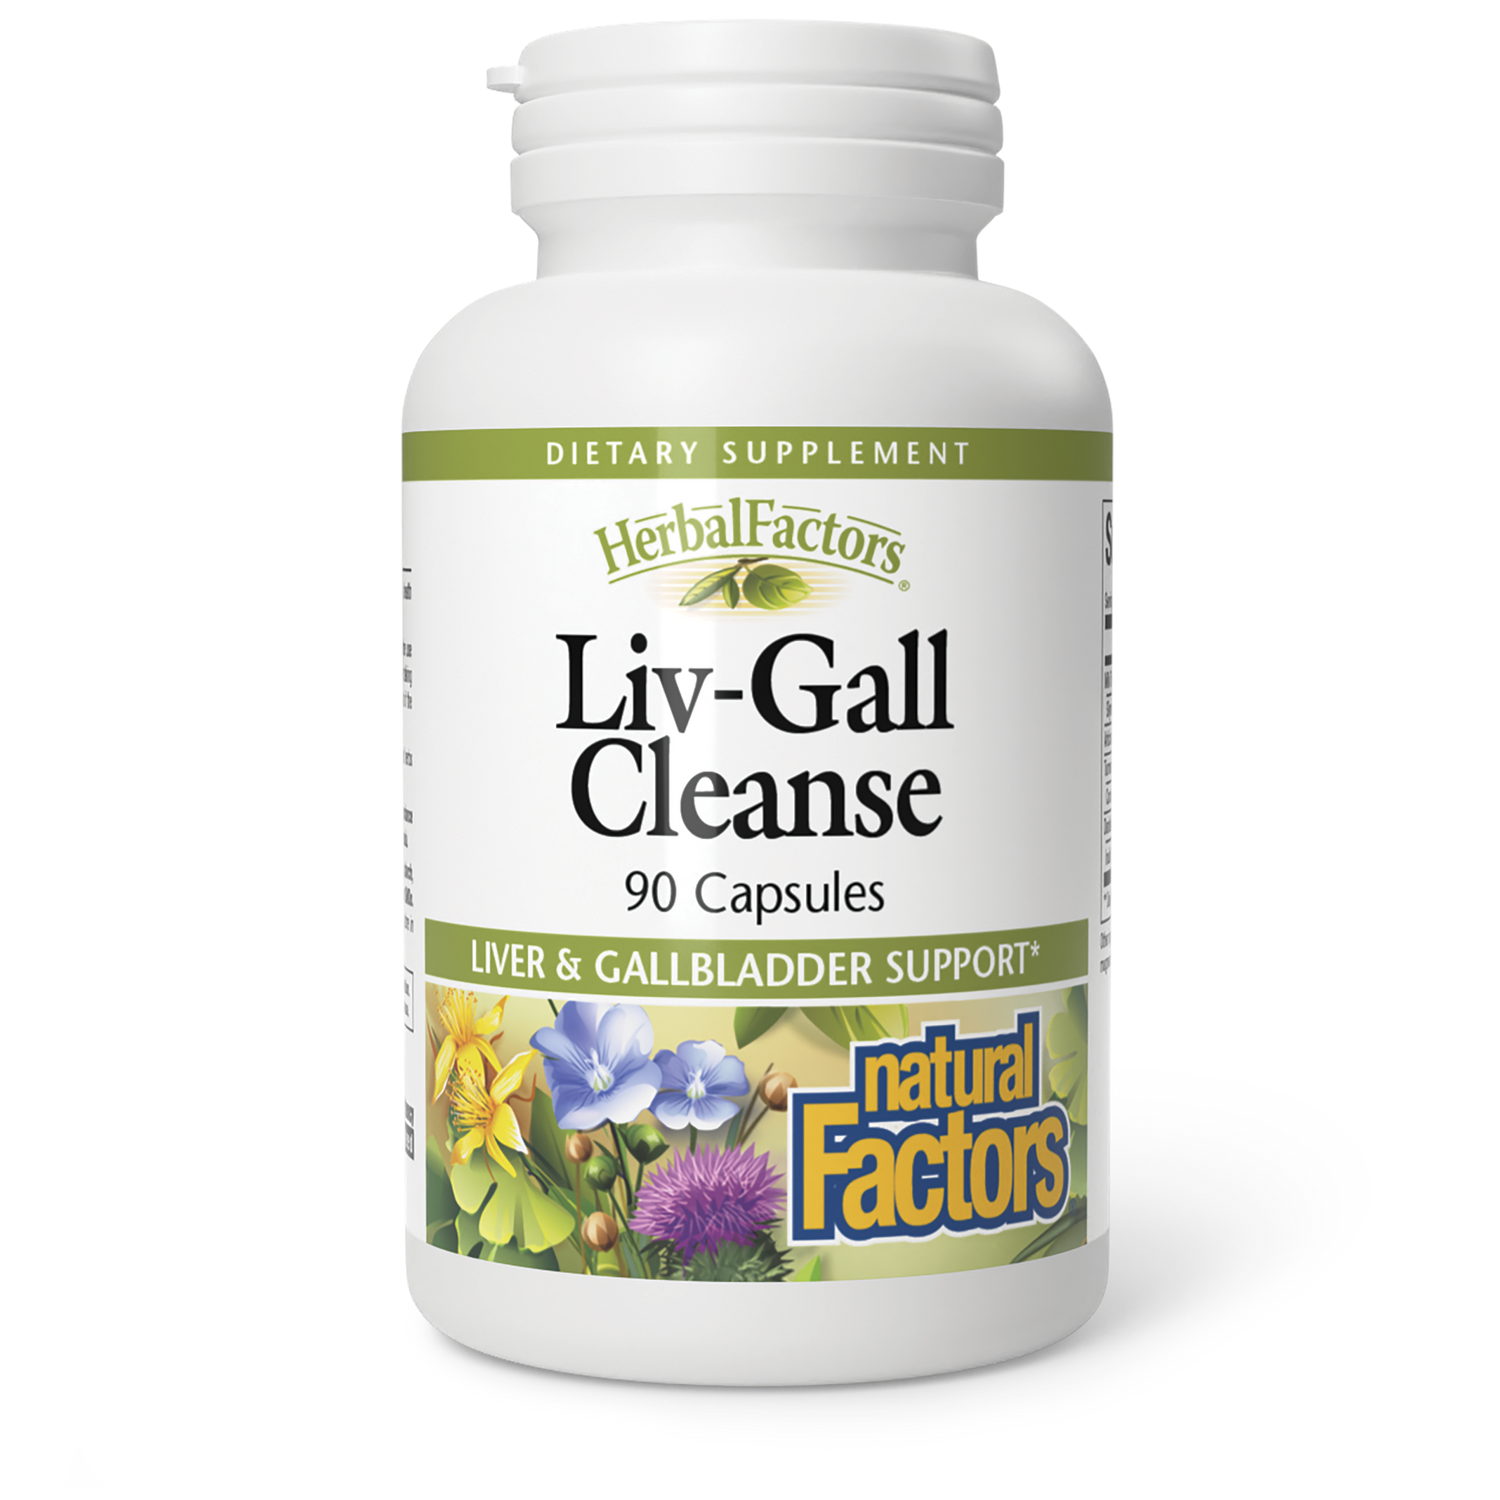 Gallbladder and liver cleanse supplements